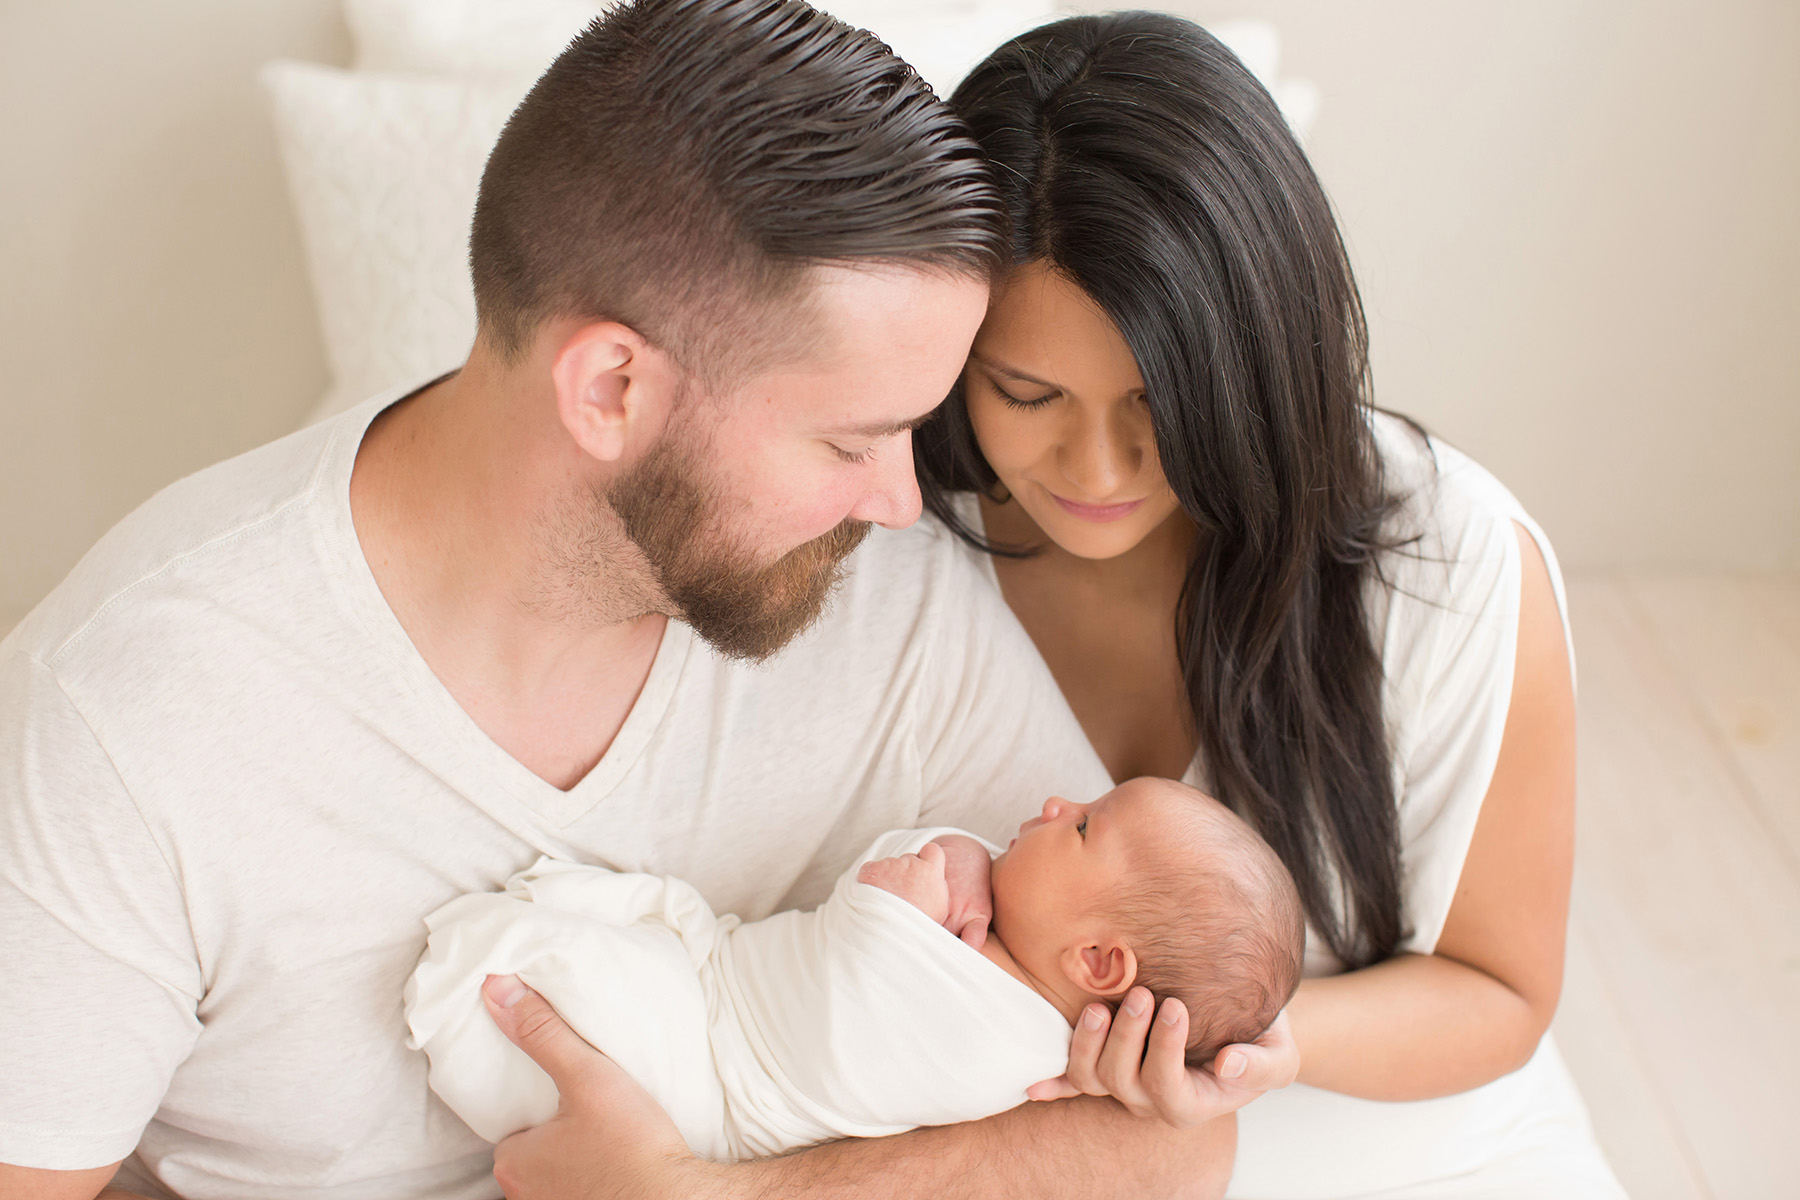 Louisville Ky Newborn photographer | Julie Brock Photography | Family Photographer | Maternity Photographer | mom and dad photo ideas with infant.jpg